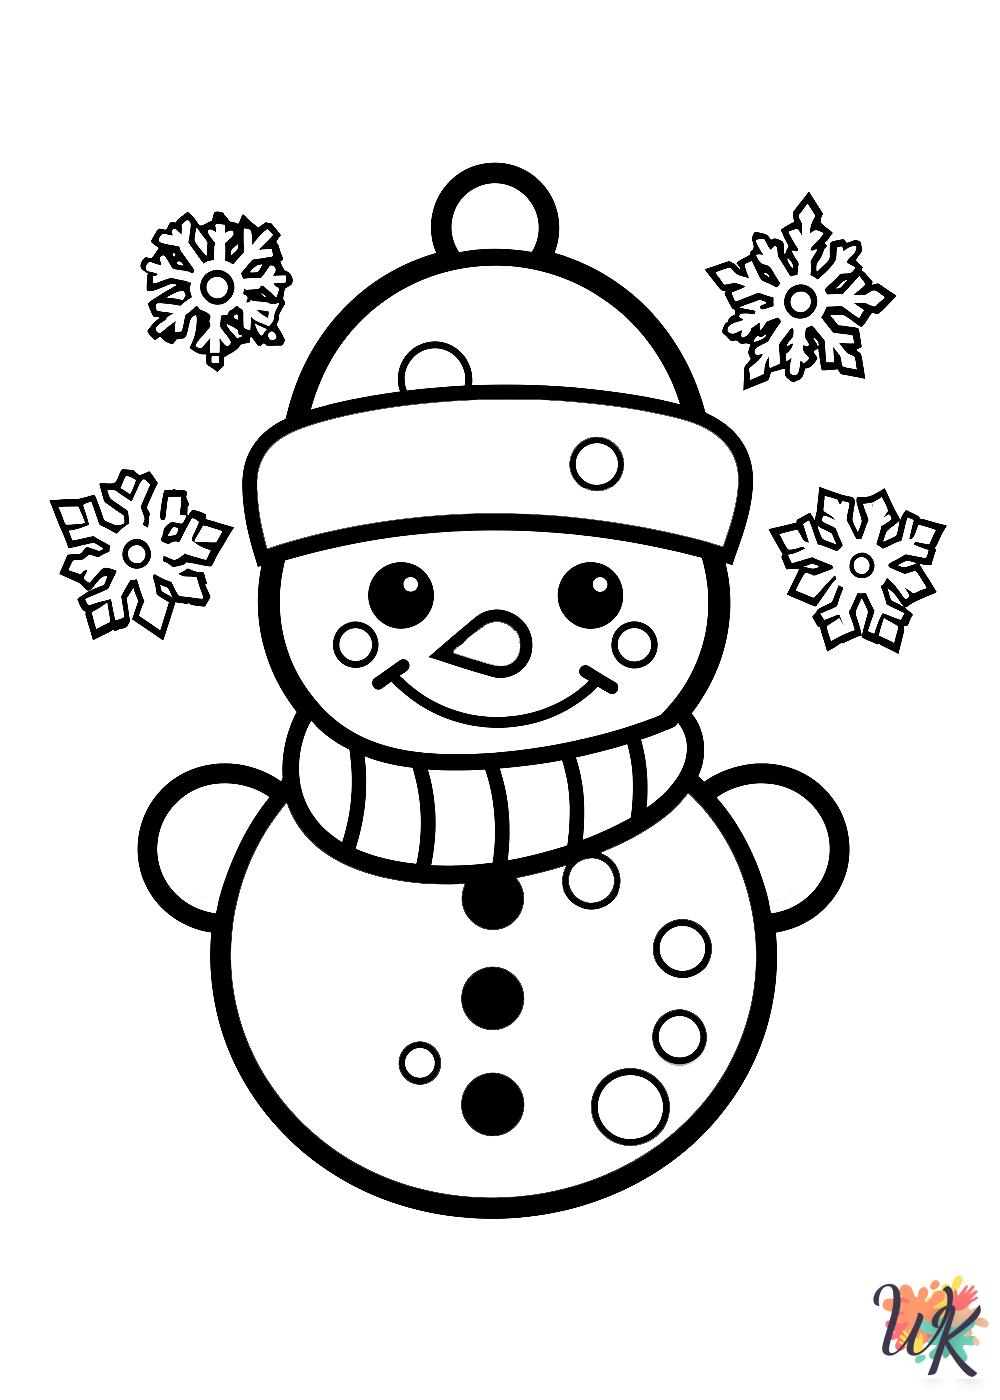 Snowman cards coloring pages